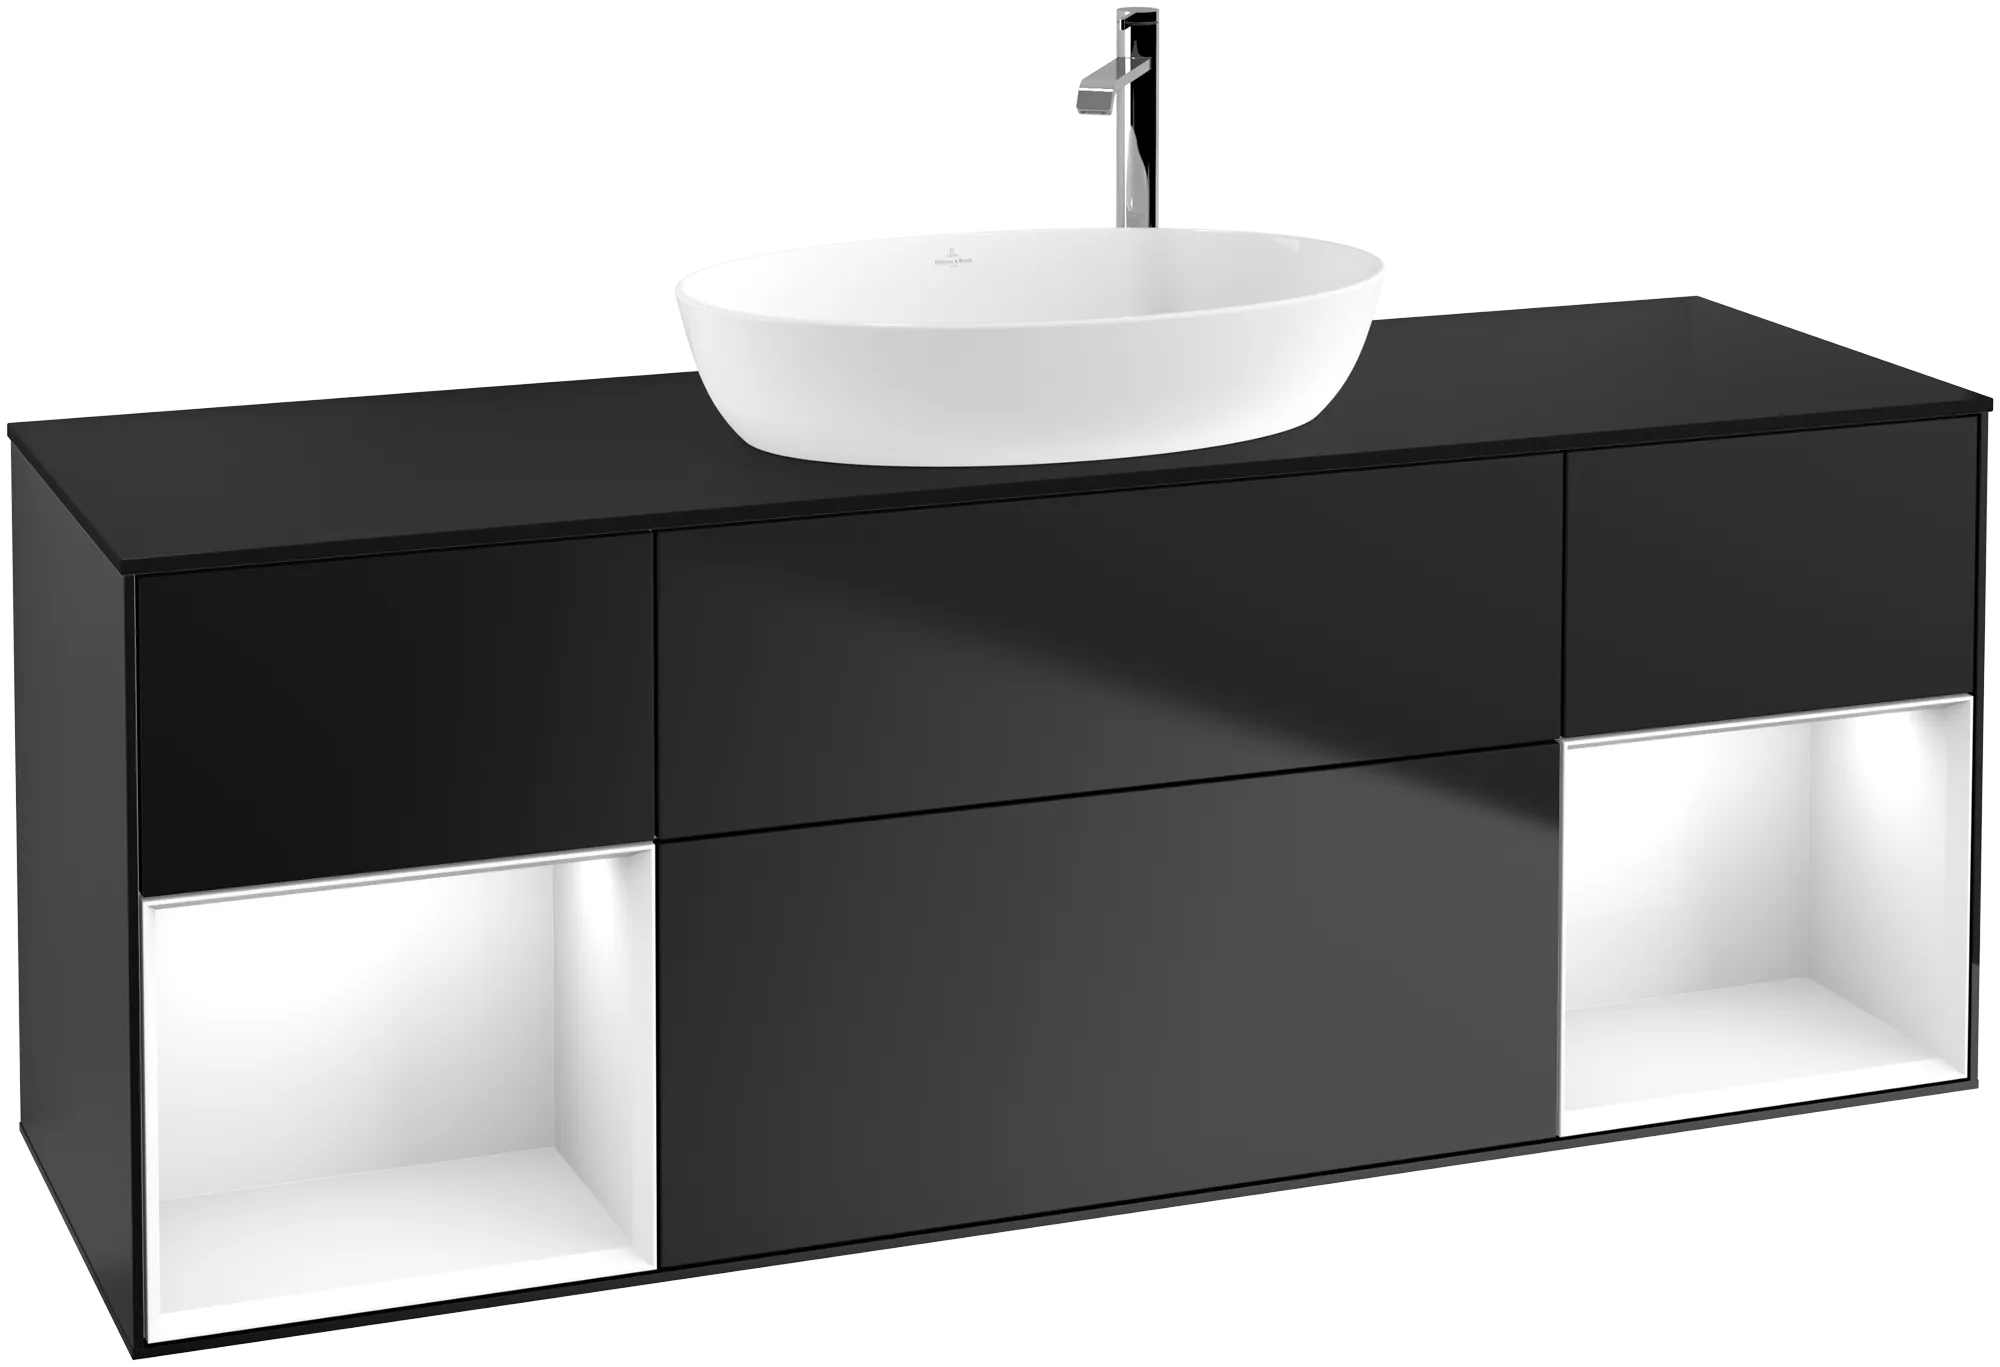 Зображення з  VILLEROY BOCH Finion Vanity unit, with lighting, 4 pull-out compartments, 1600 x 603 x 501 mm, Black Matt Lacquer / Glossy White Lacquer / Glass Black Matt #G982GFPD